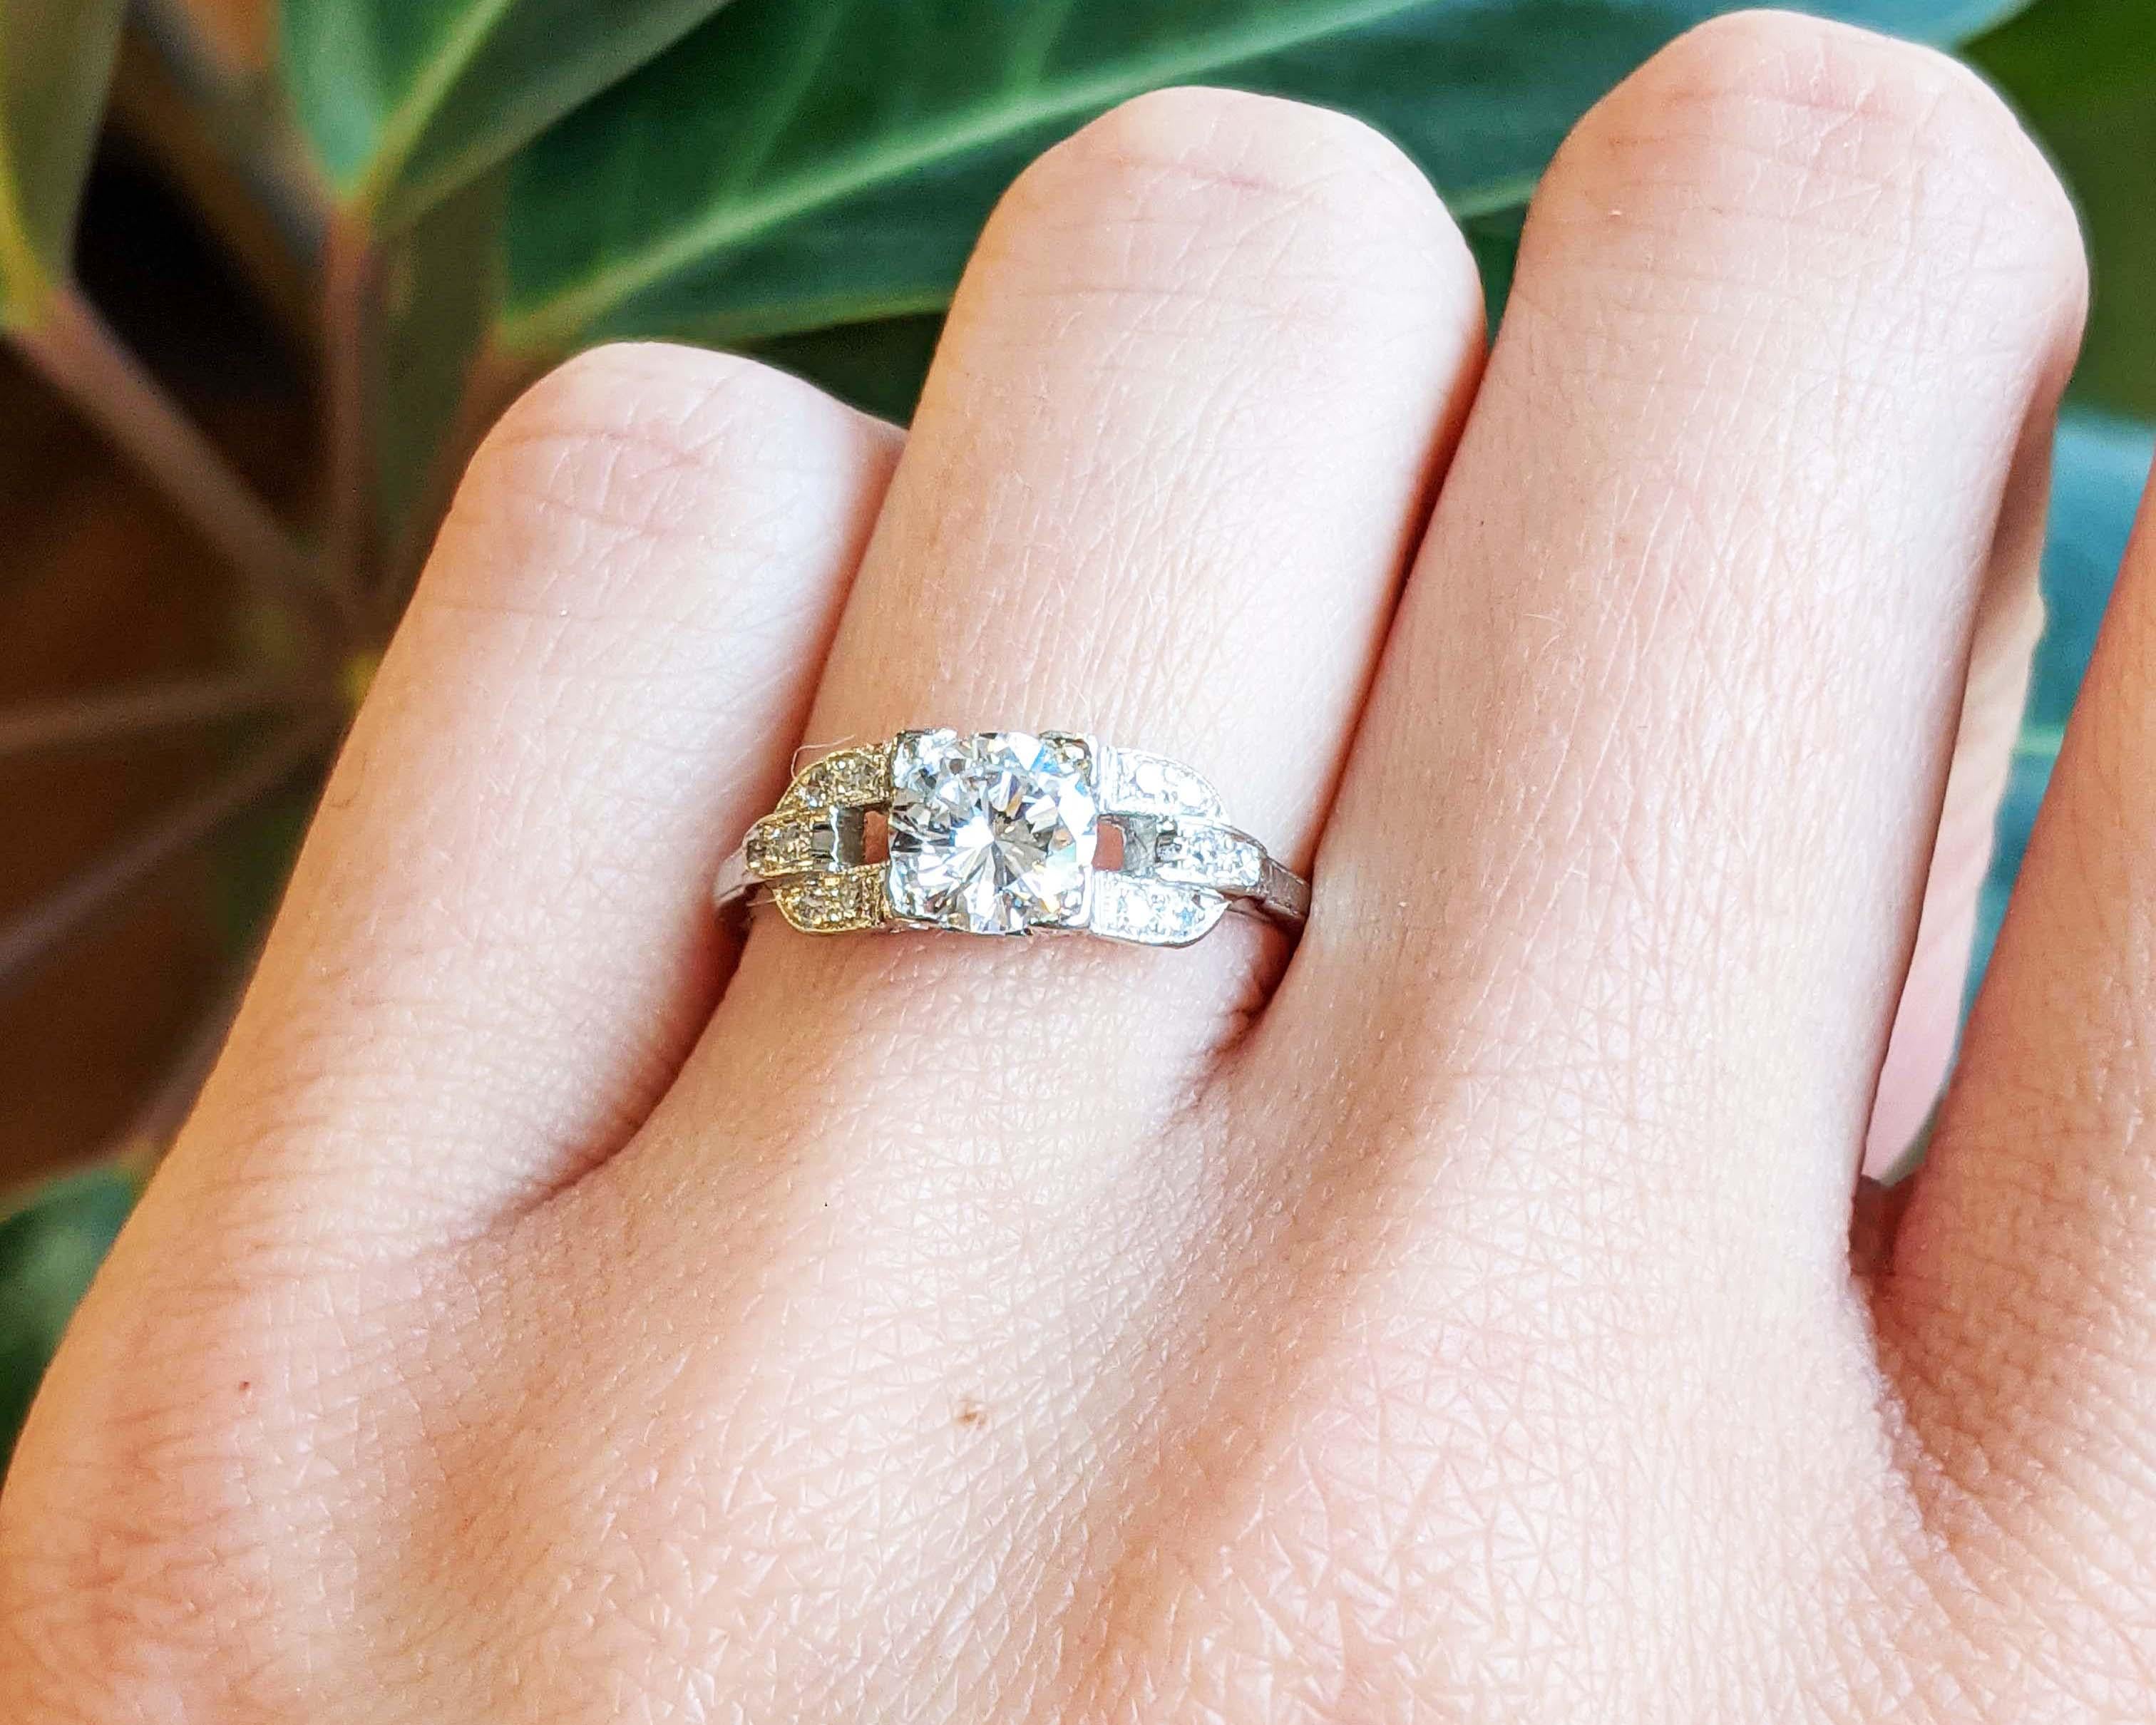 This gorgeous Art Deco engagement ring is in bright white platinum and features a stunning Euro-cut diamond center.
The understated architectural design of the setting is a definitive Deco design featuring a subtle element of negative space and fine